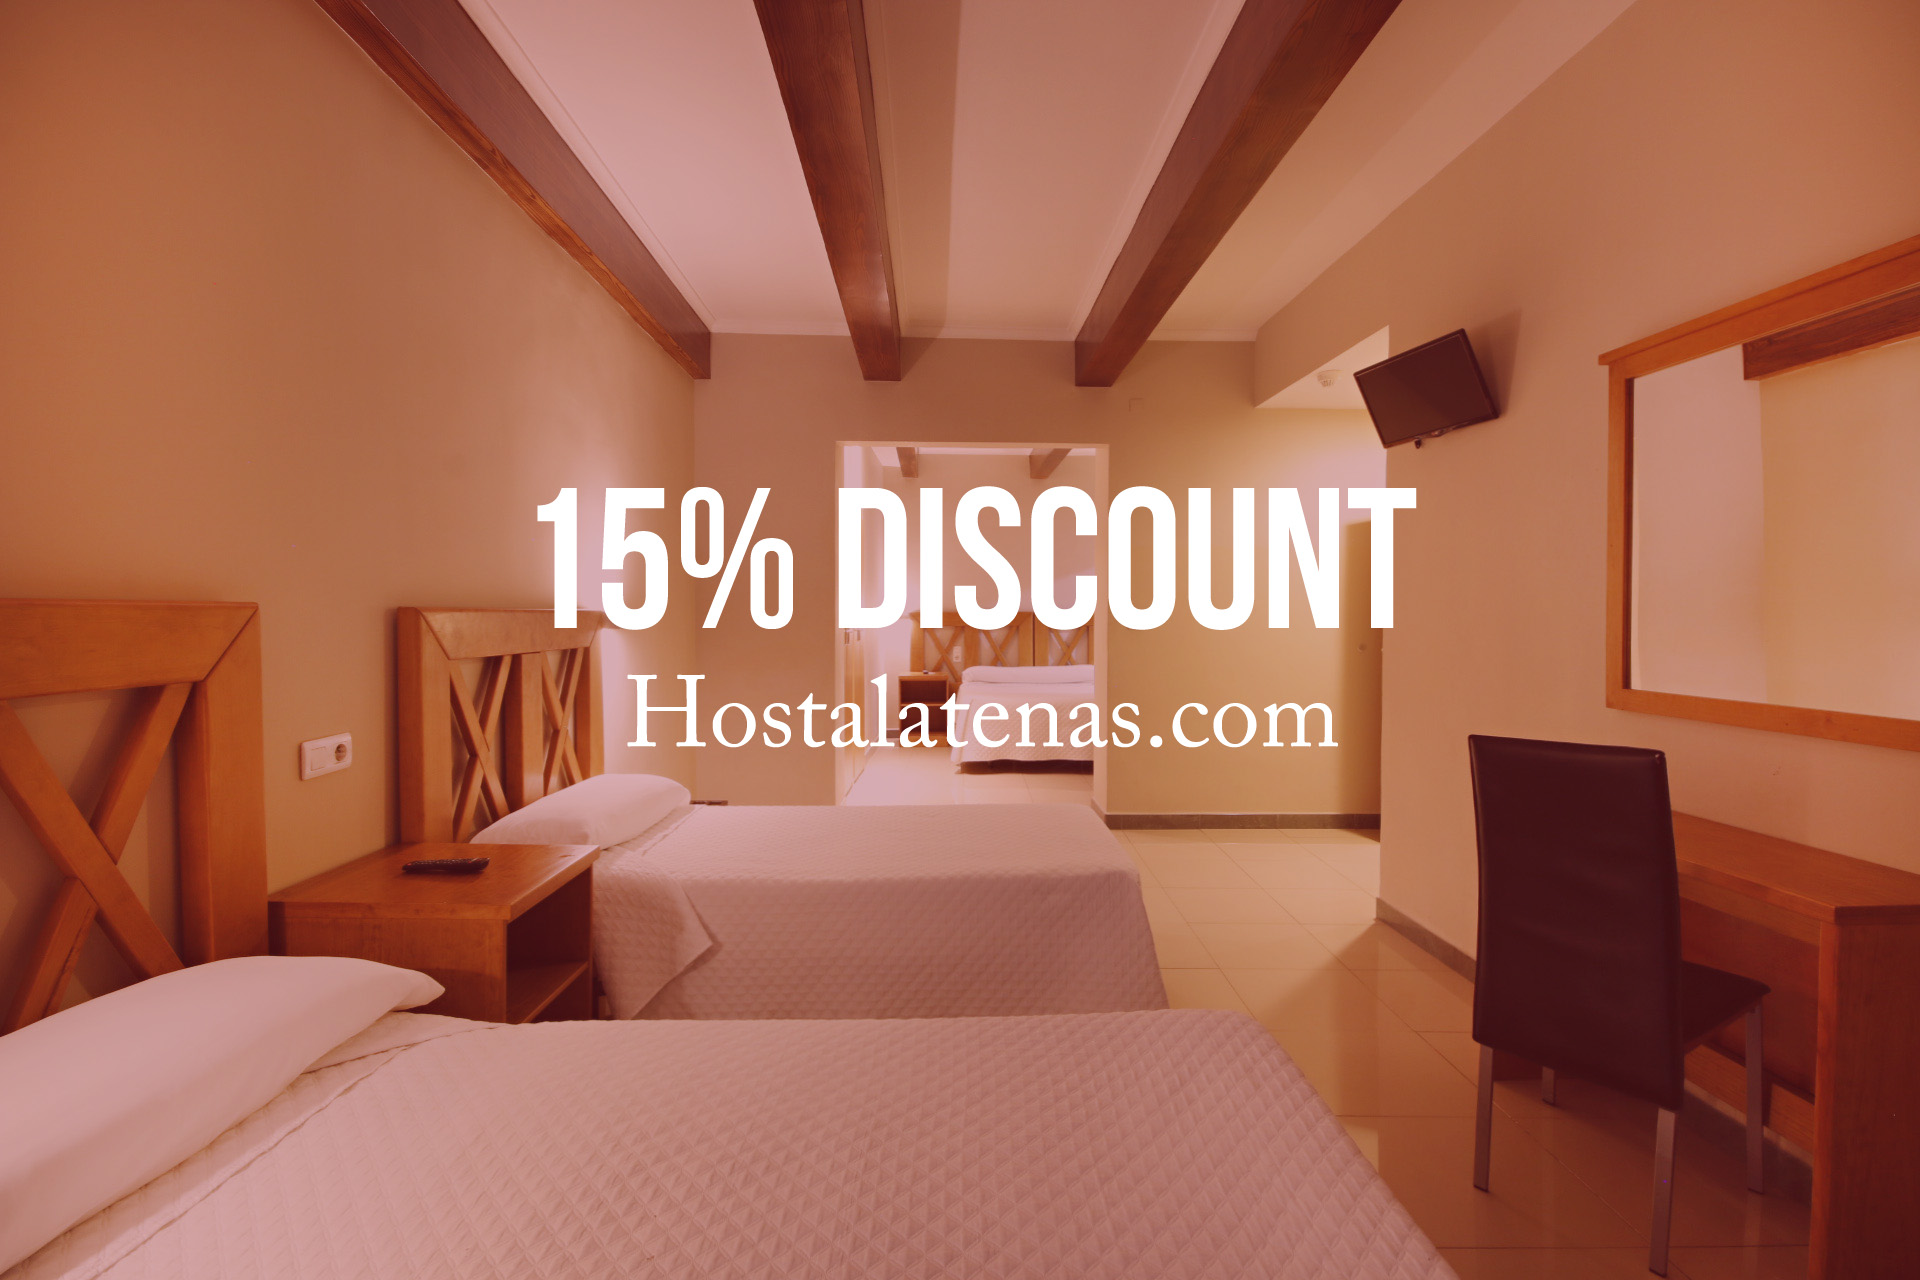 Offers promotions and discounts.Granada Hotel, Atenas